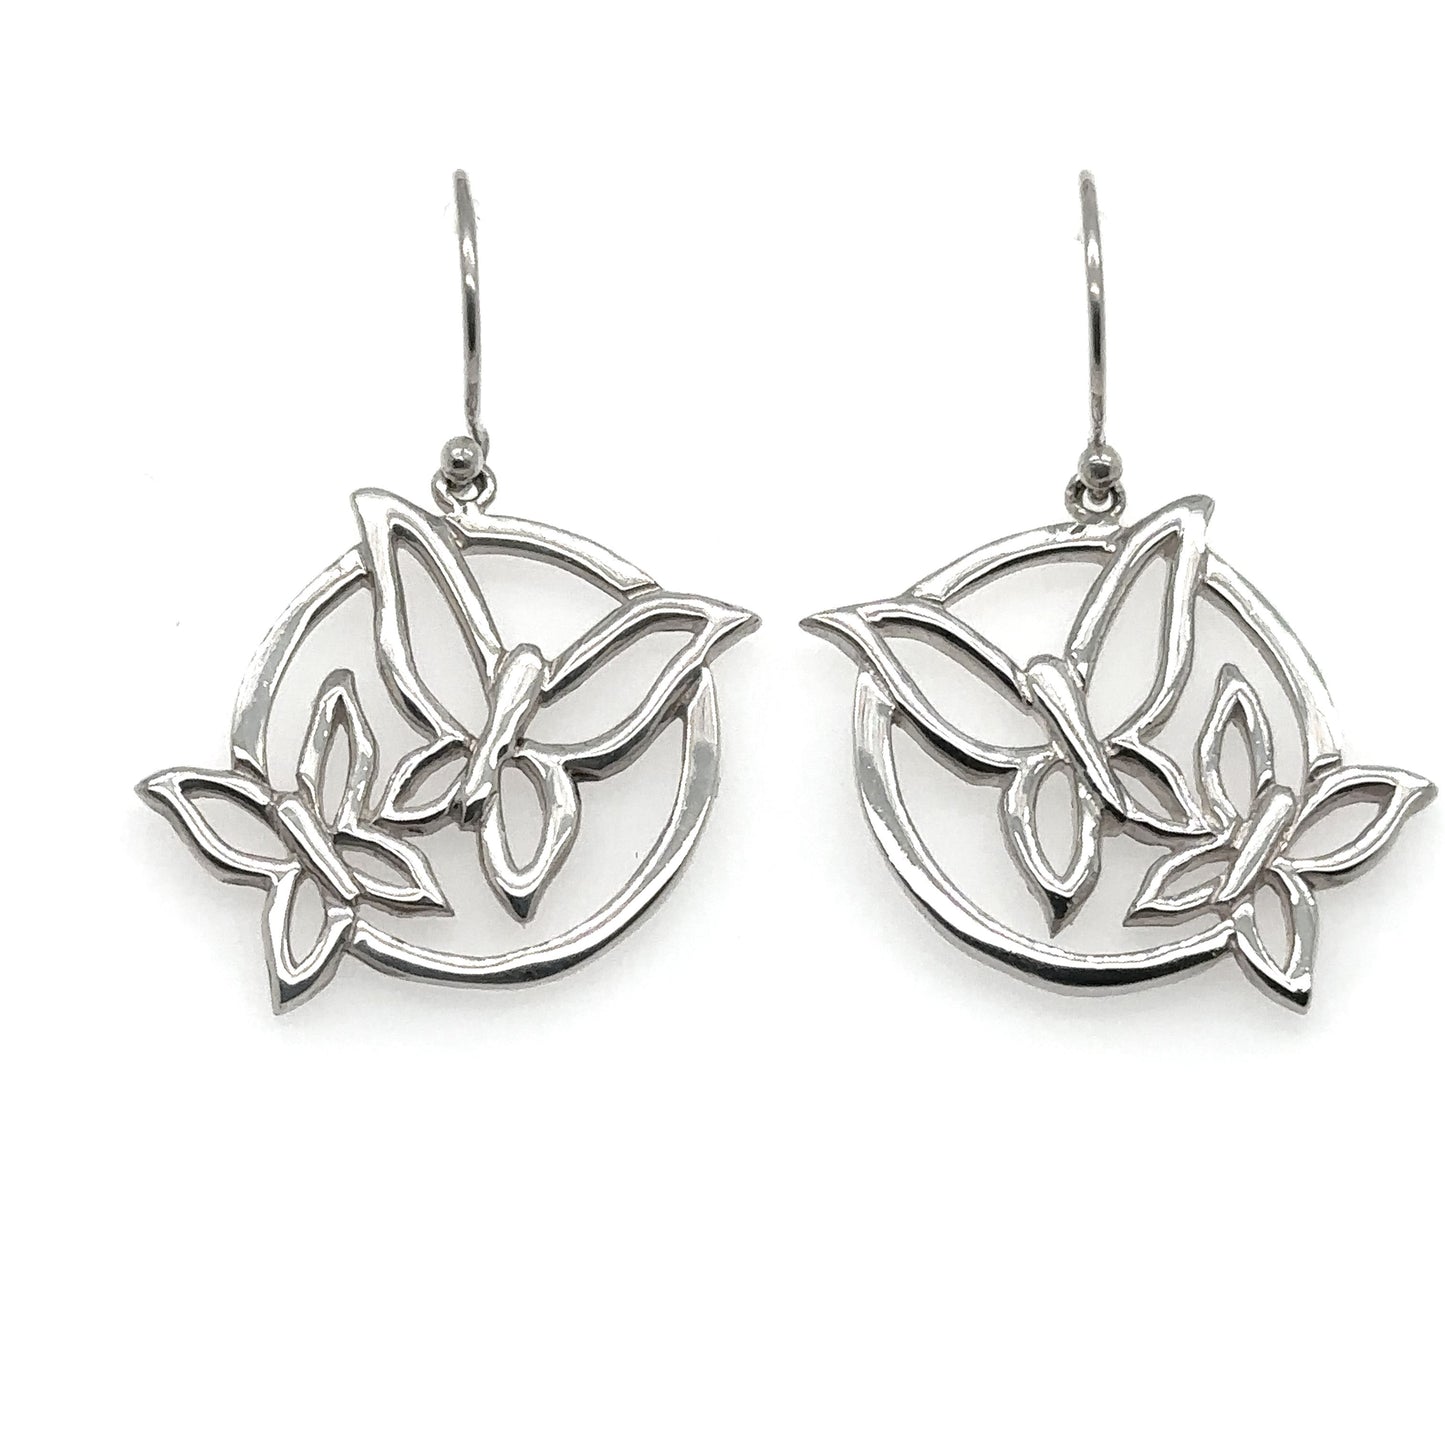 A pair of Super Silver Butterfly Outline Earrings with french hook.